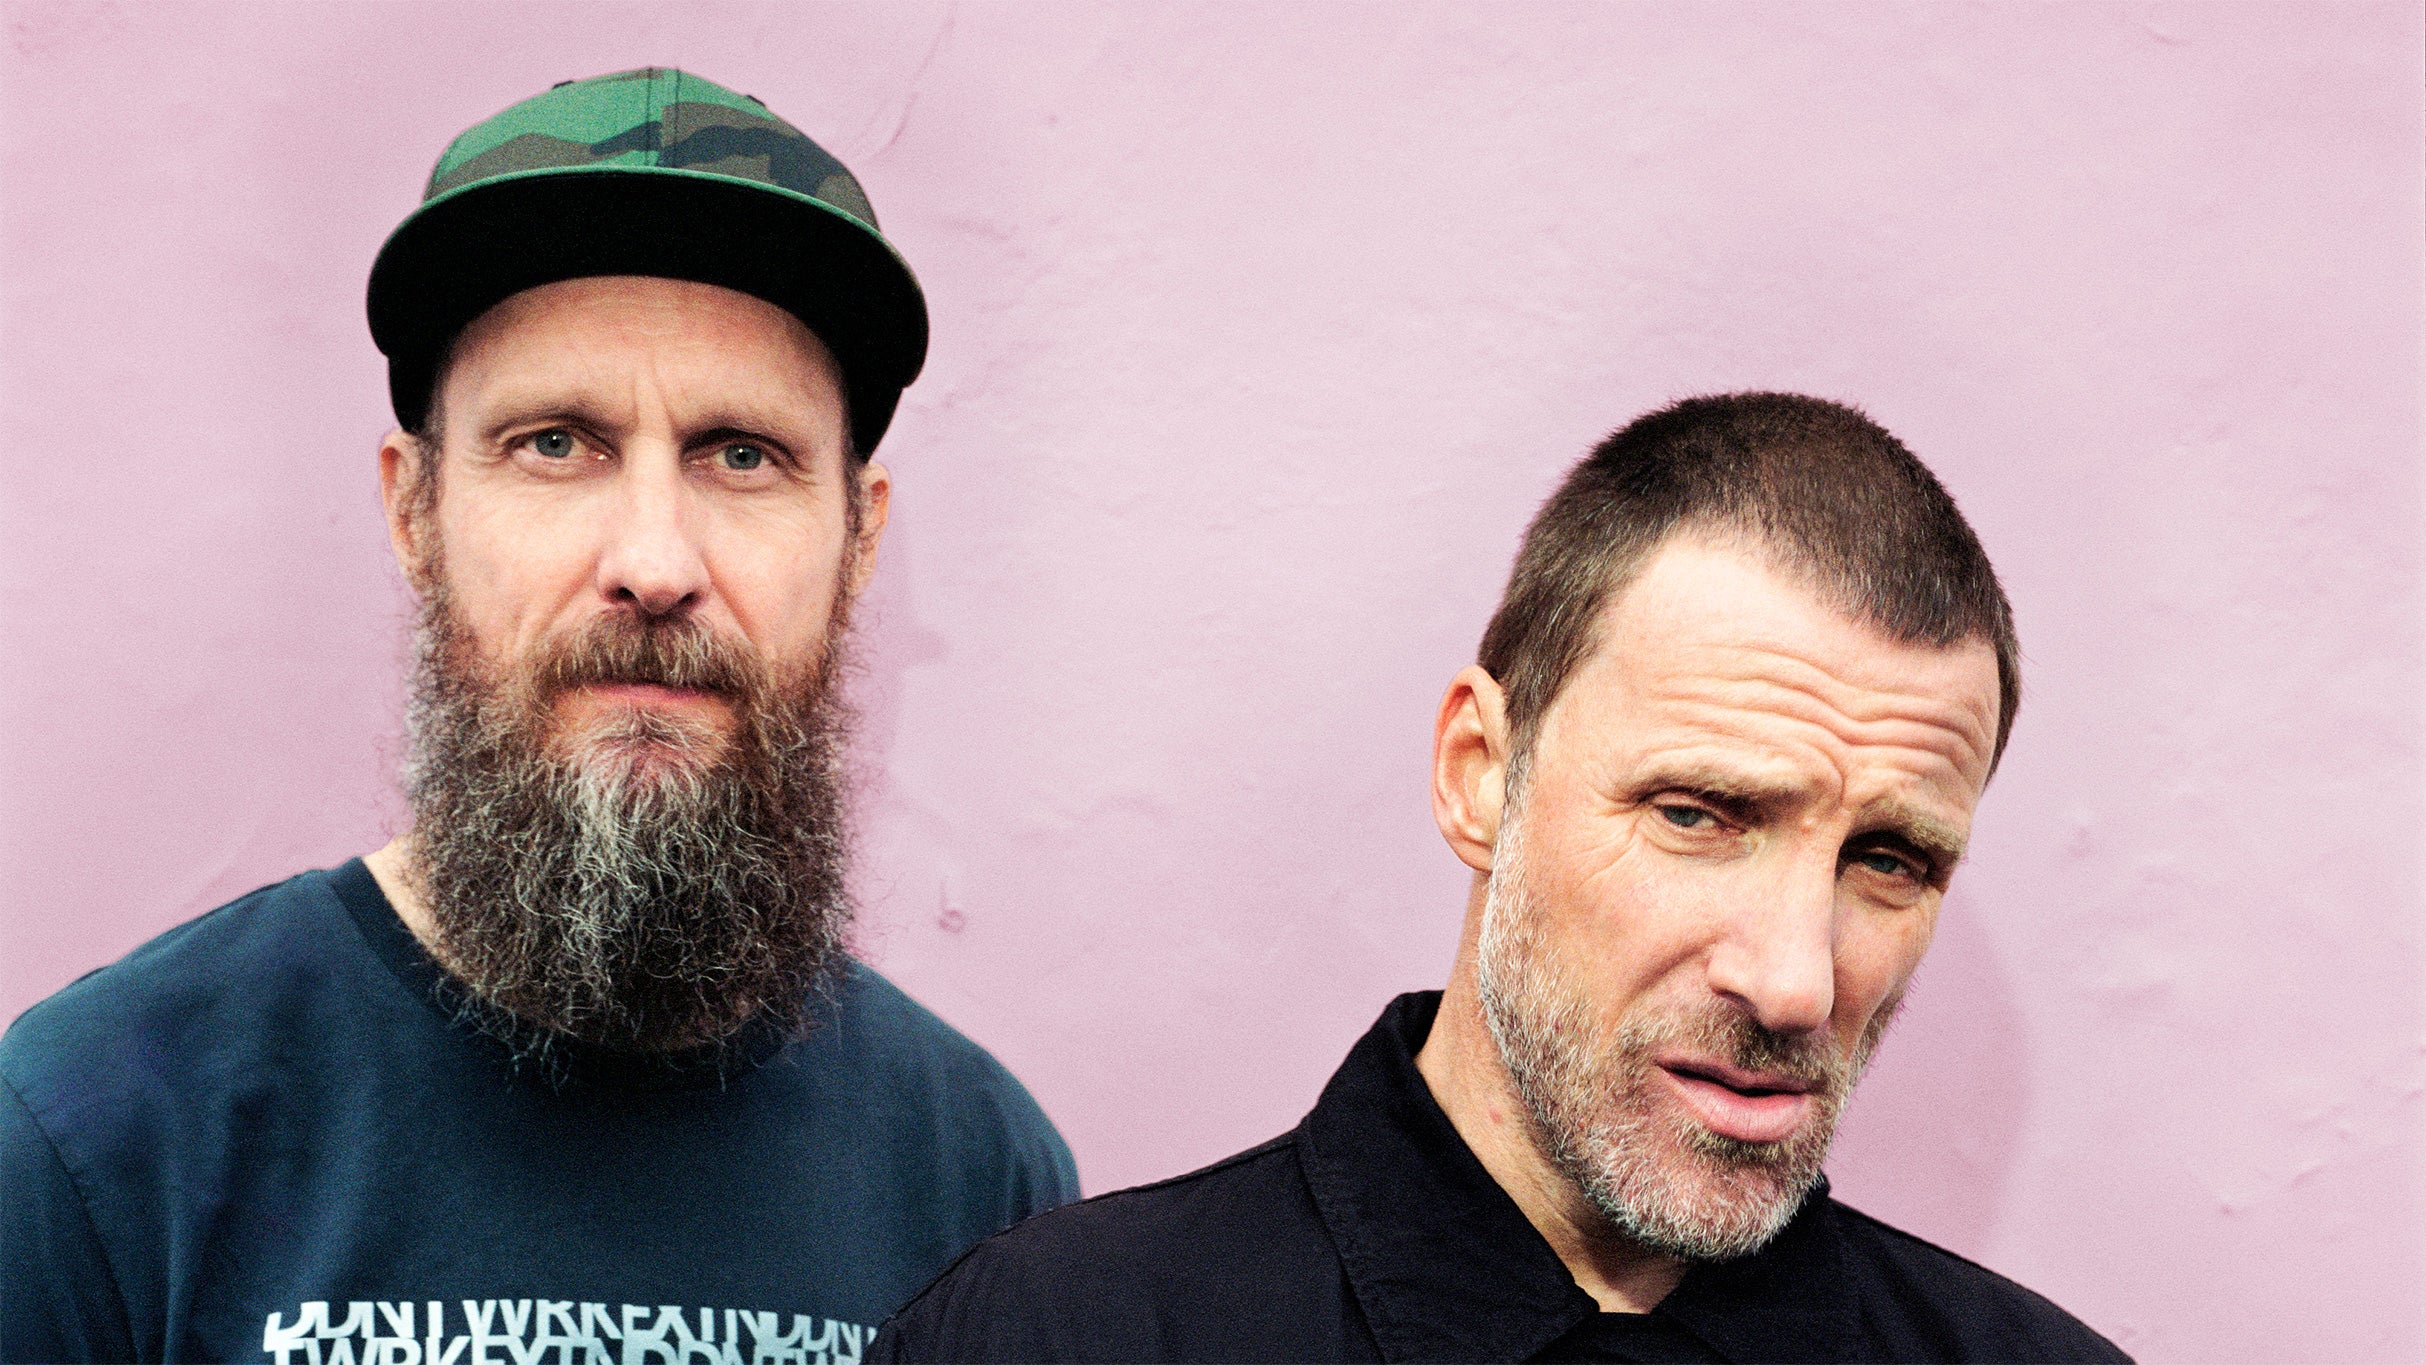 Sleaford Mods free presale code for early tickets in Vancouver